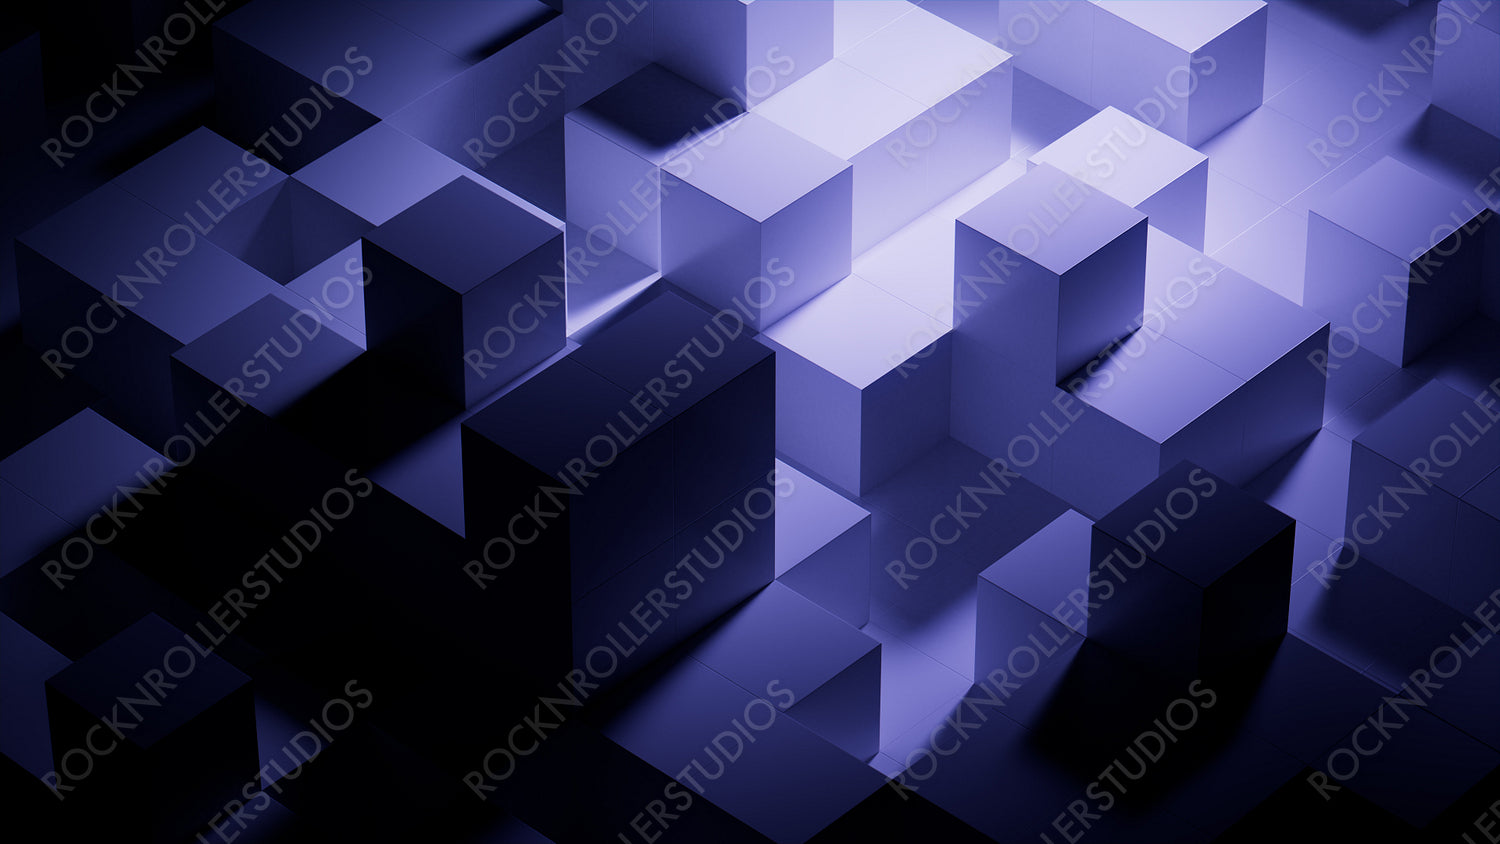 Perfectly Arranged Glossy Cubes. Blue and Black, Contemporary Tech Background. 3D Render.